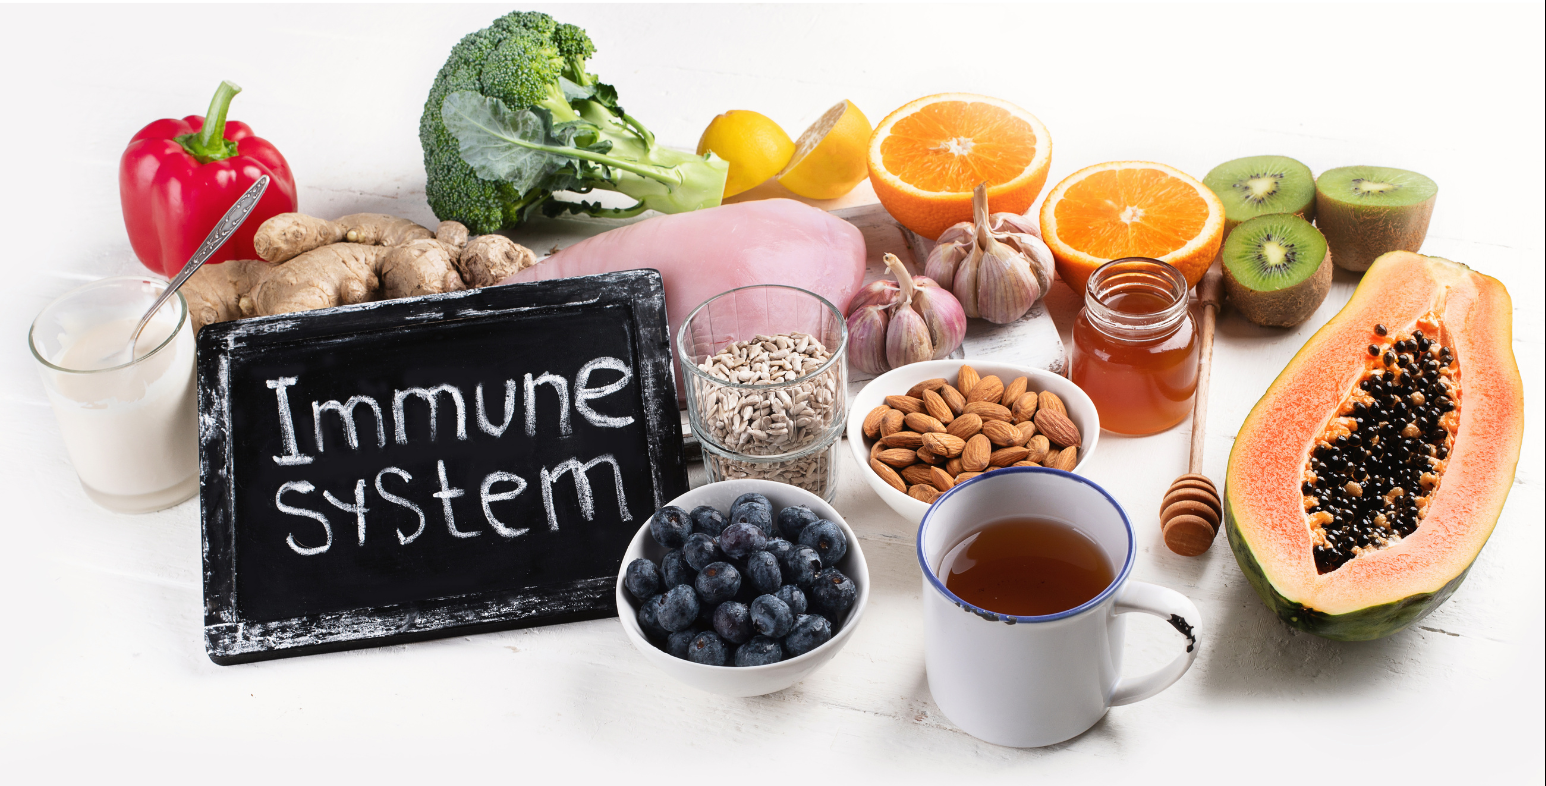 7 Steps to Build Immunity and Prevent Colds